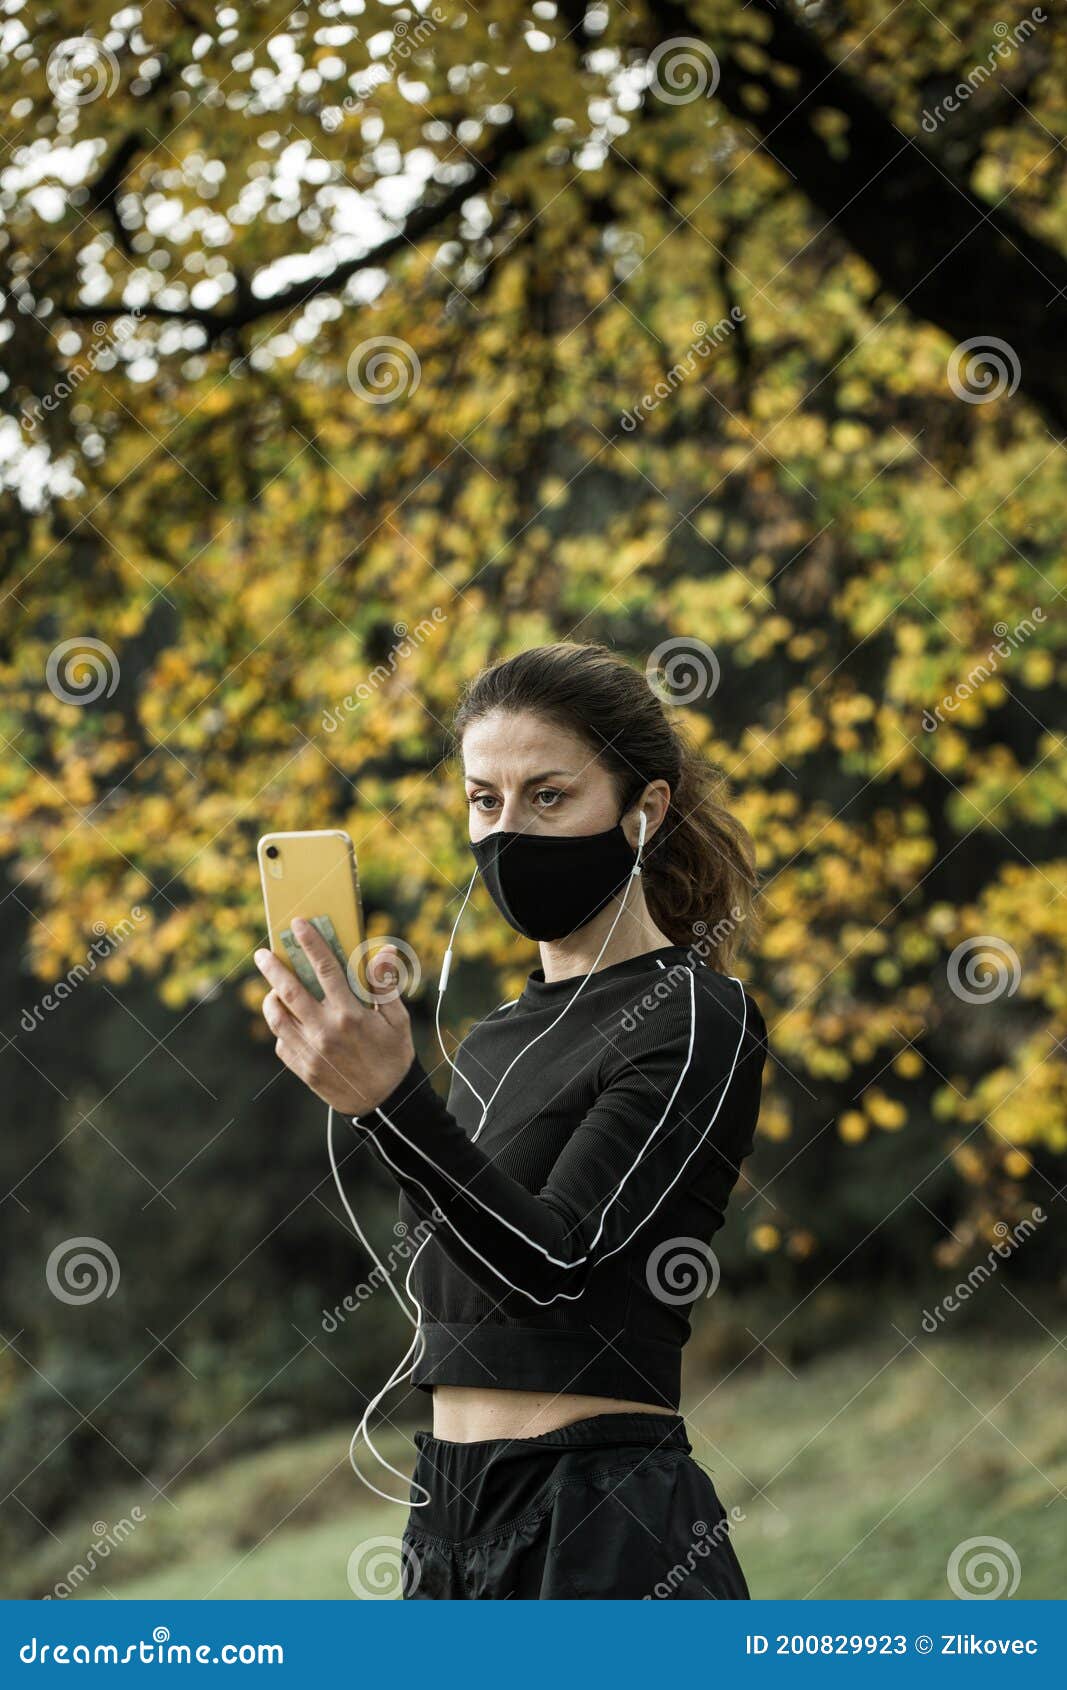 woman with face mask taking video call. giving lectures while working out during covid-19